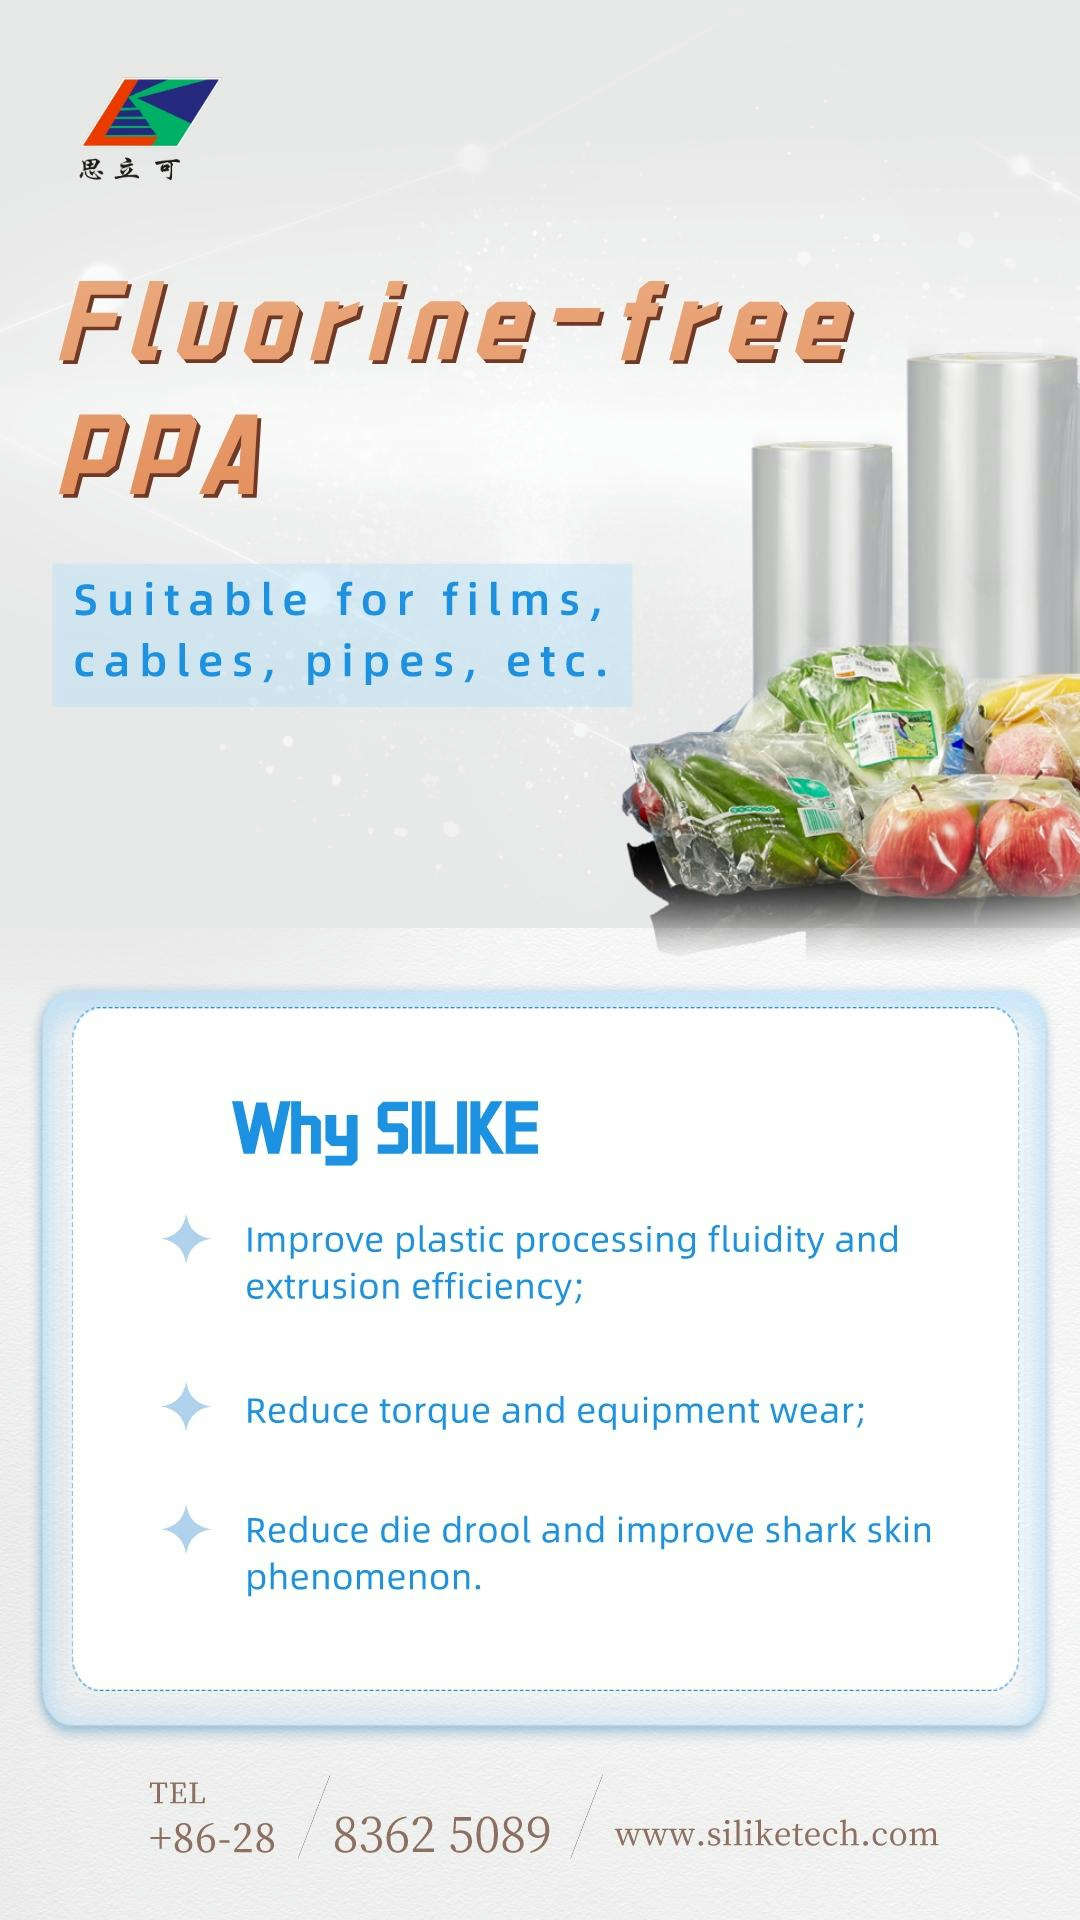 Fluorine-free PPA in film processing applications.